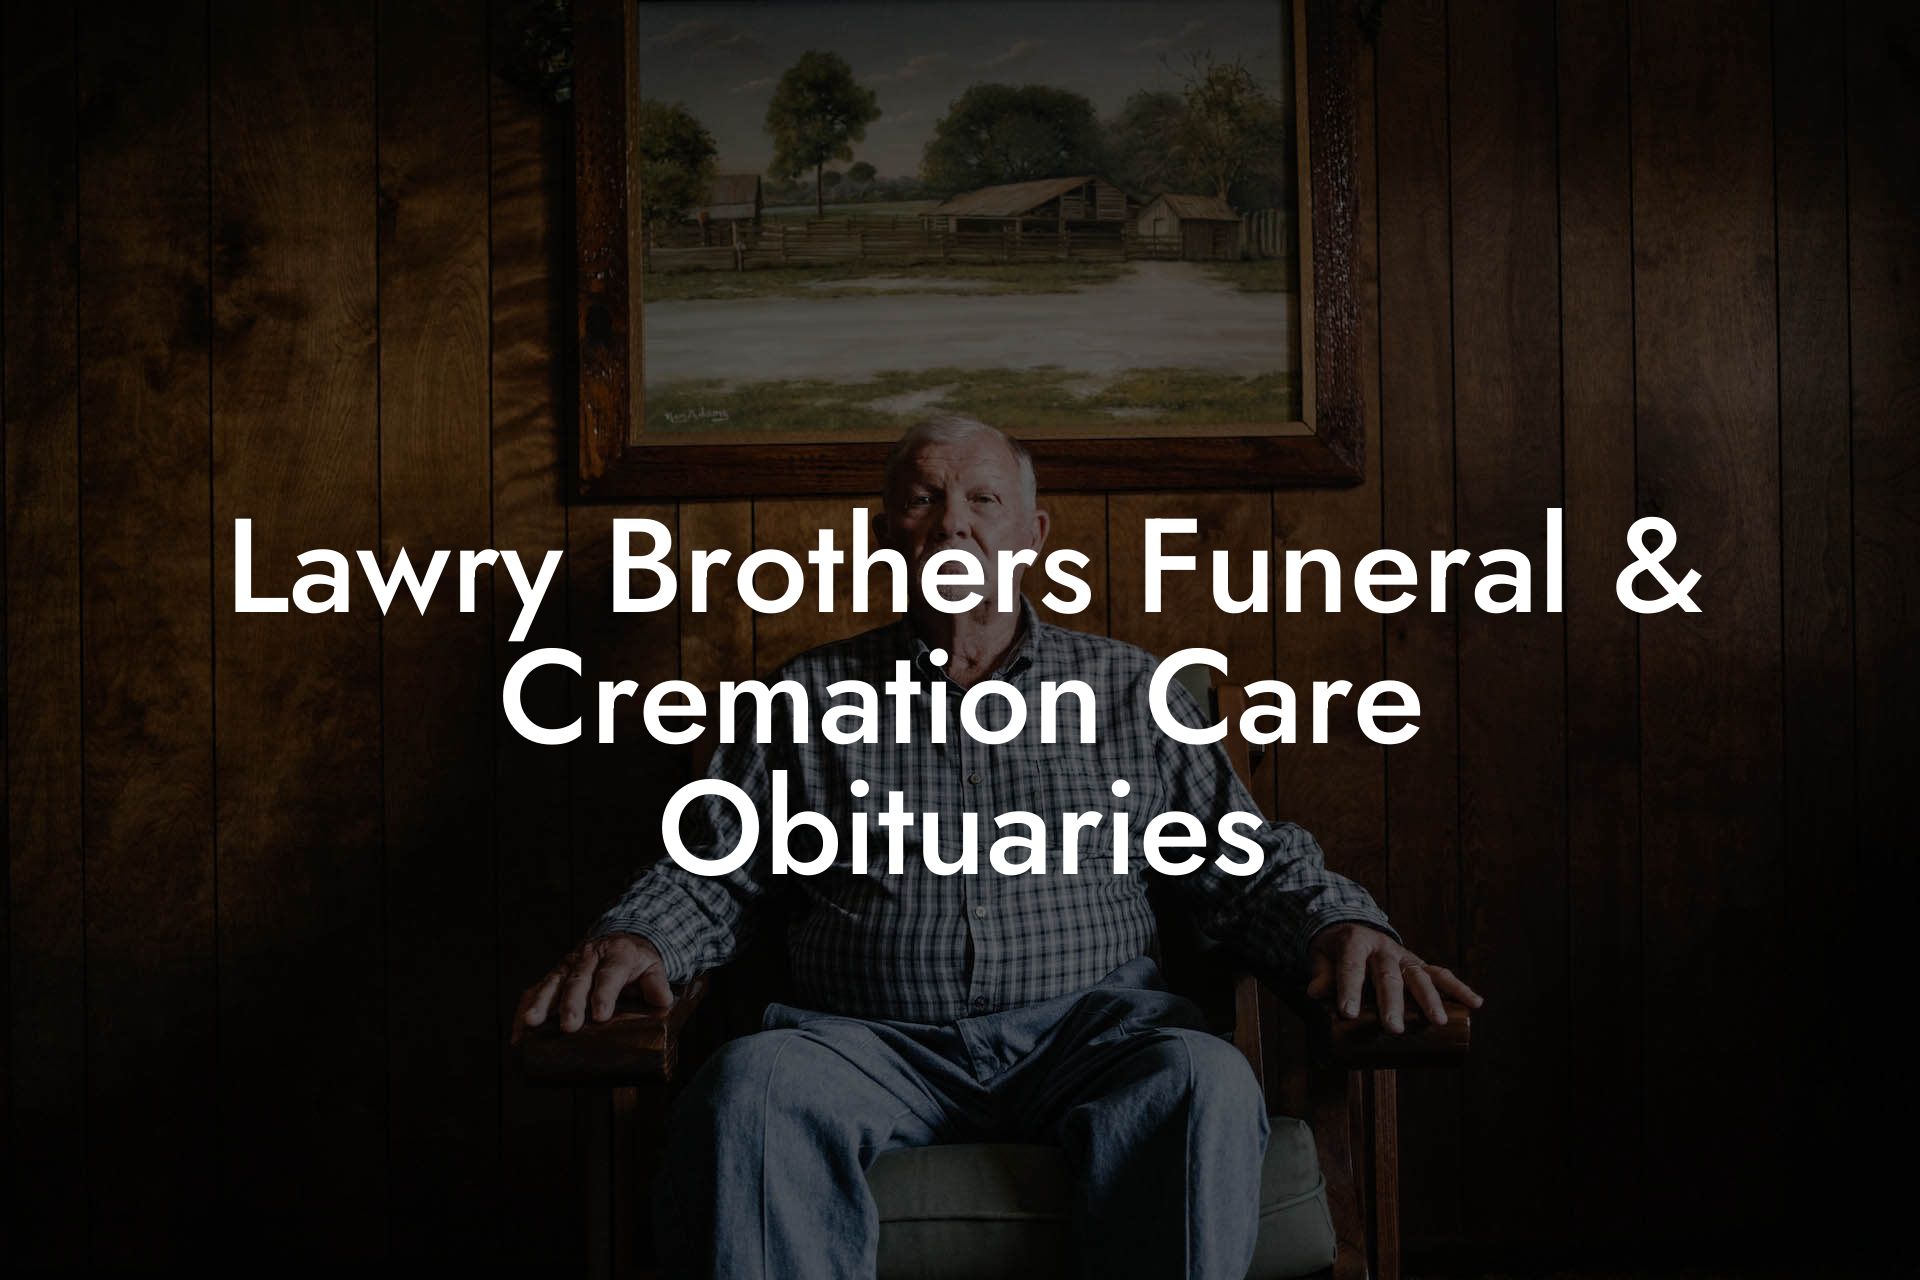 Lawry Brothers Funeral & Cremation Care Obituaries